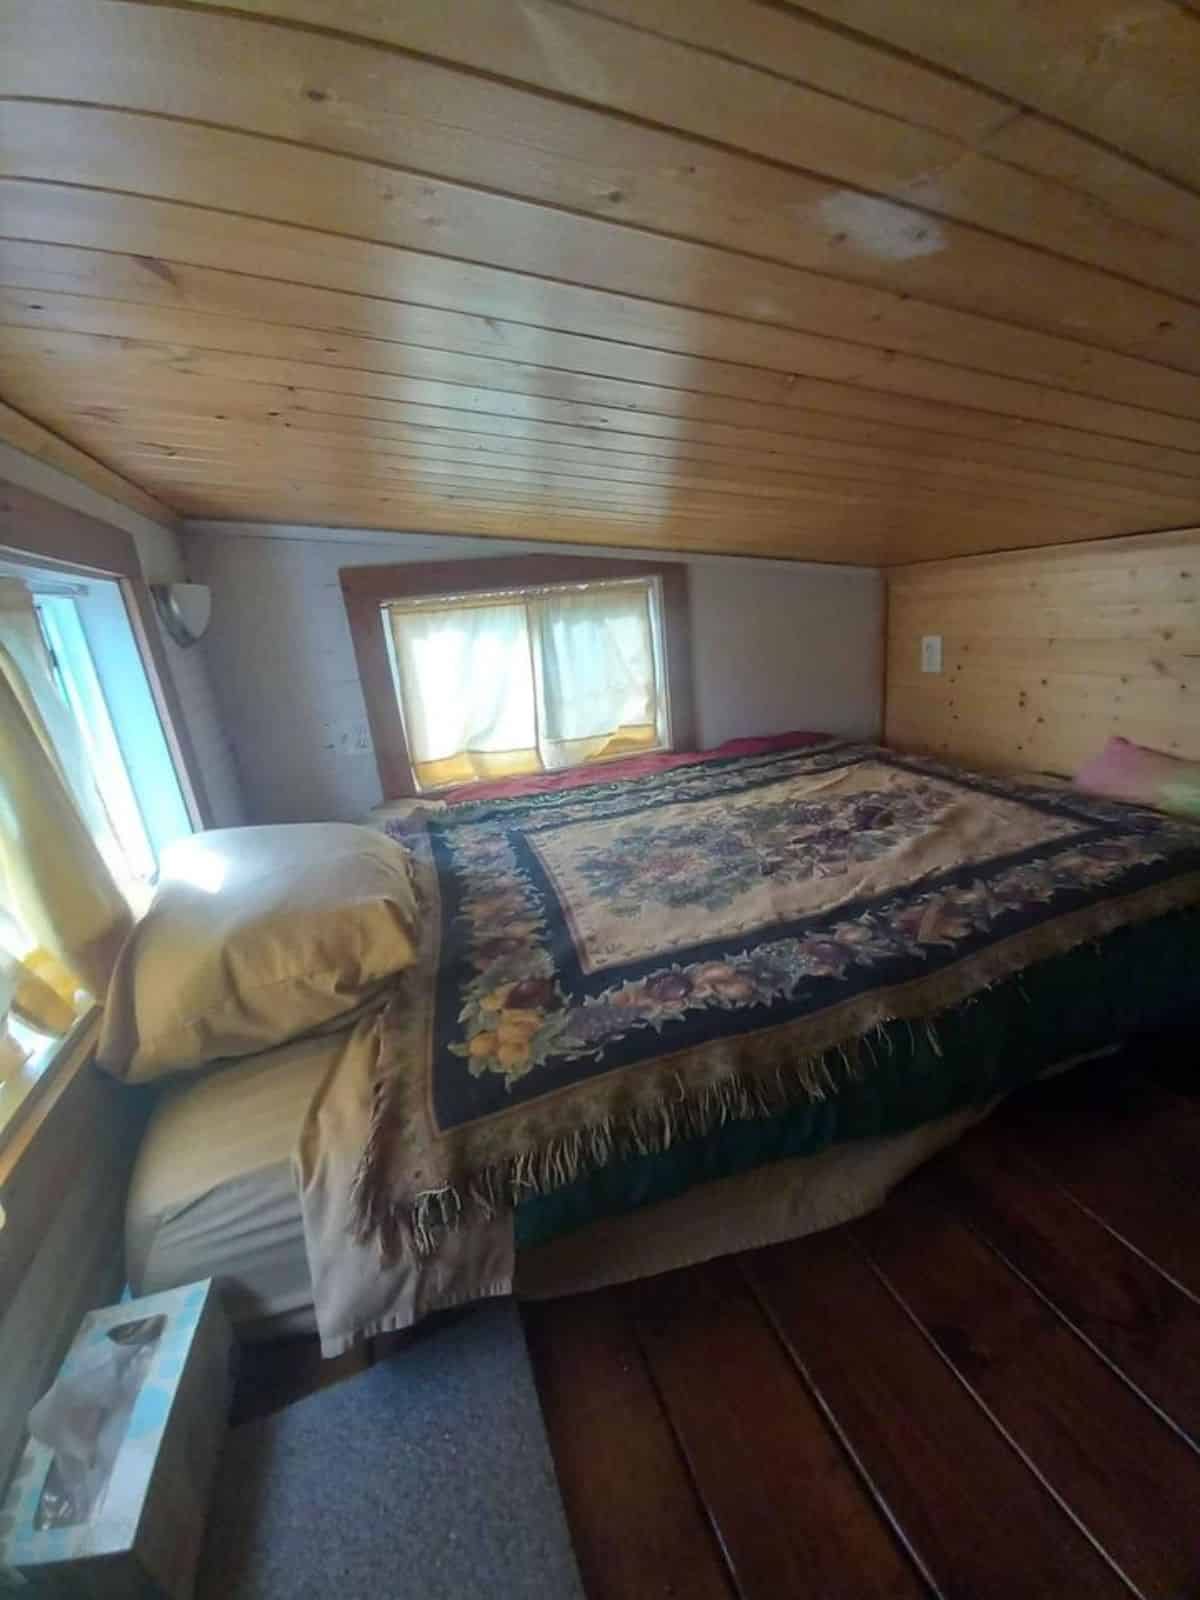 loft bedroom is very spacious with huge double mattress and still ample space left